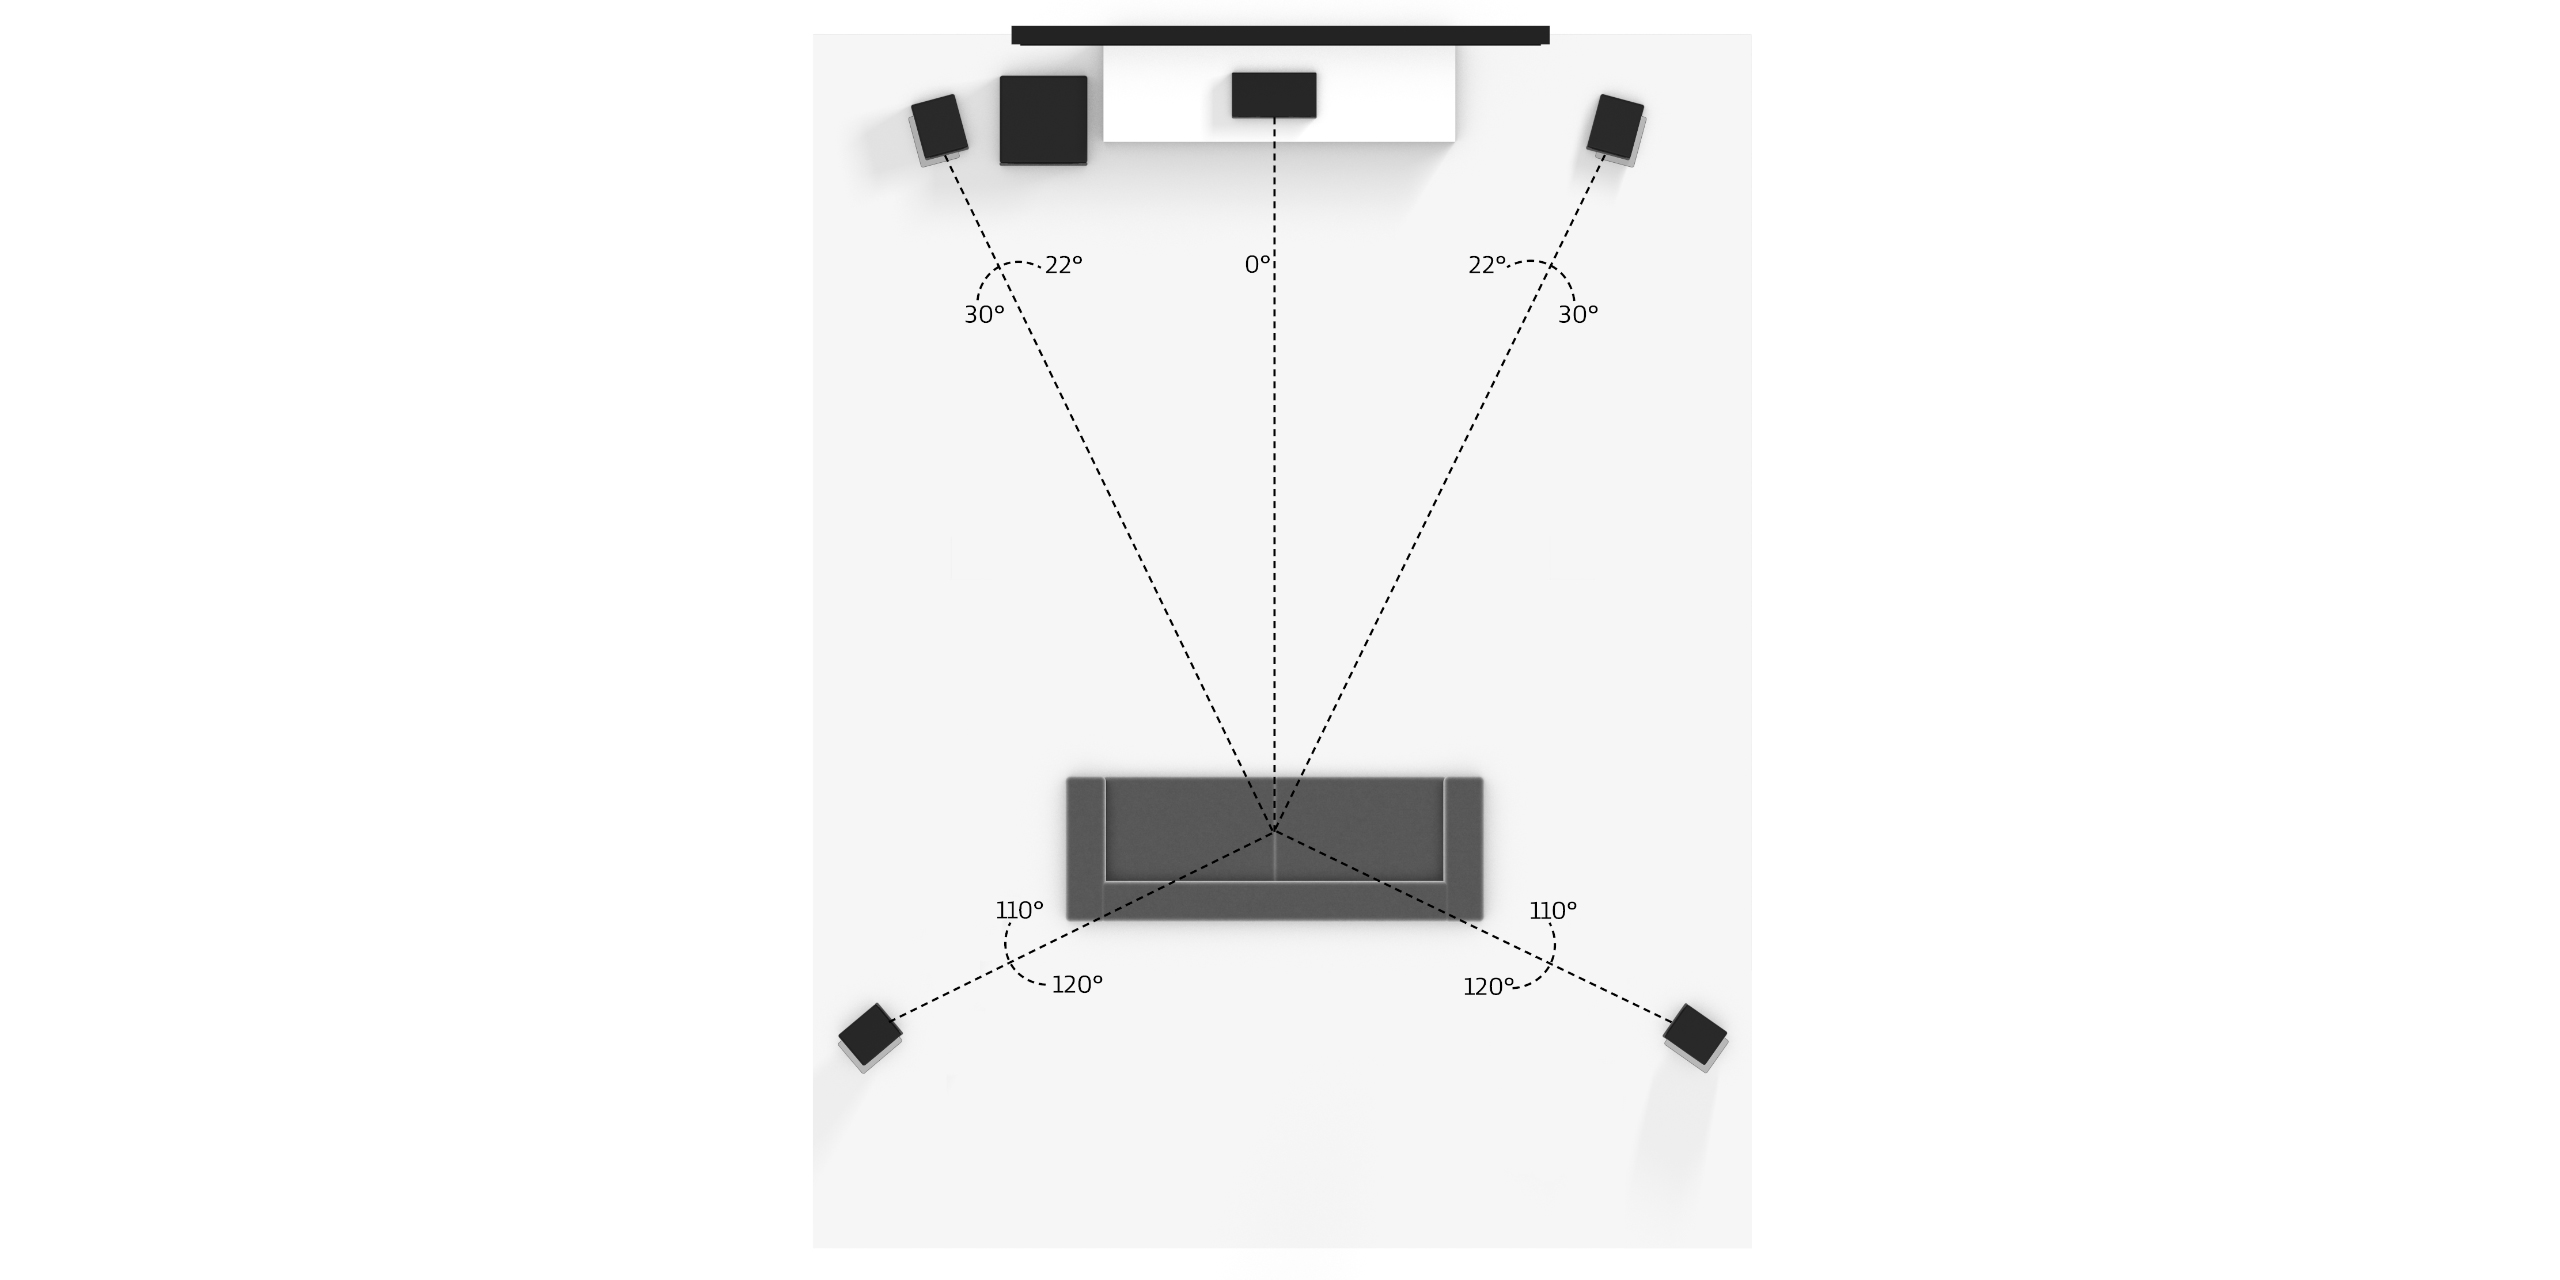 dolby atmos enabled 7.1.4 speaker placement